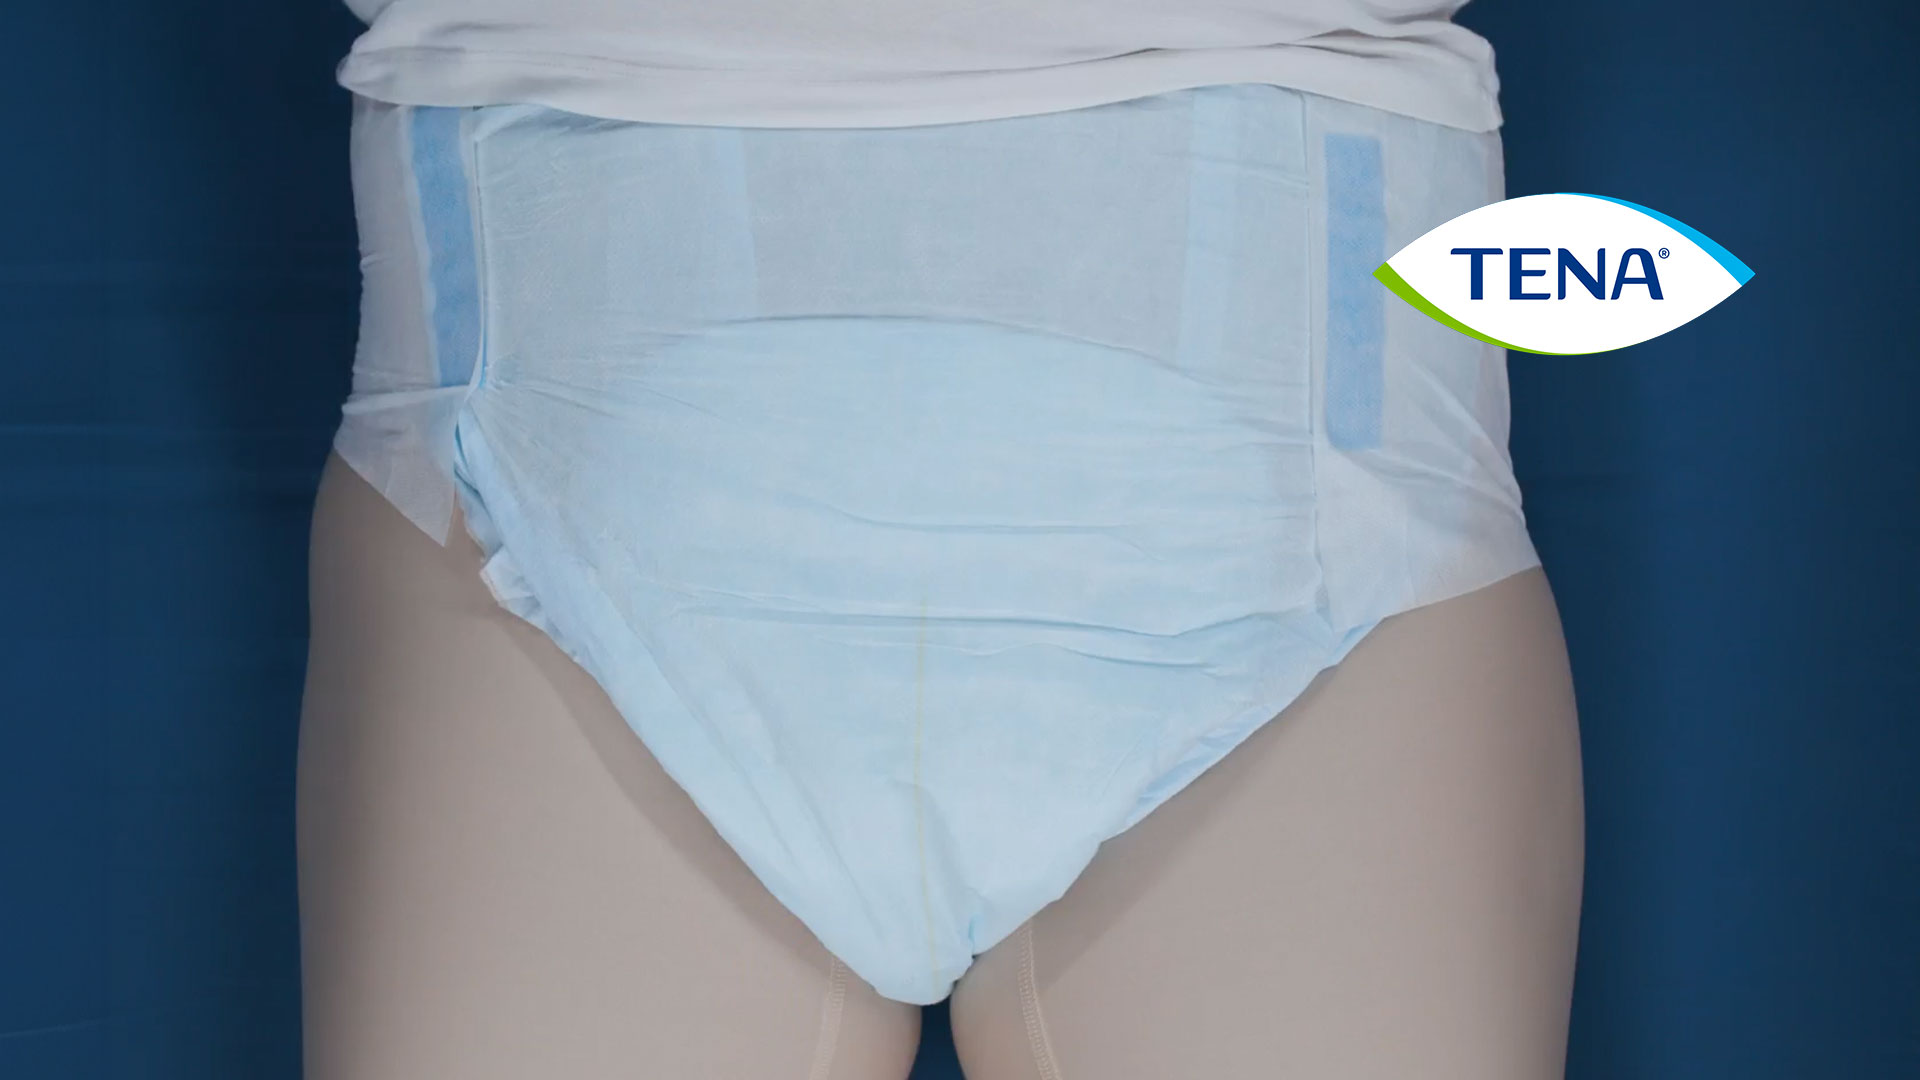 Thumbnail Image for the TENA Complete™ and Complete +Care™ Product Application Video